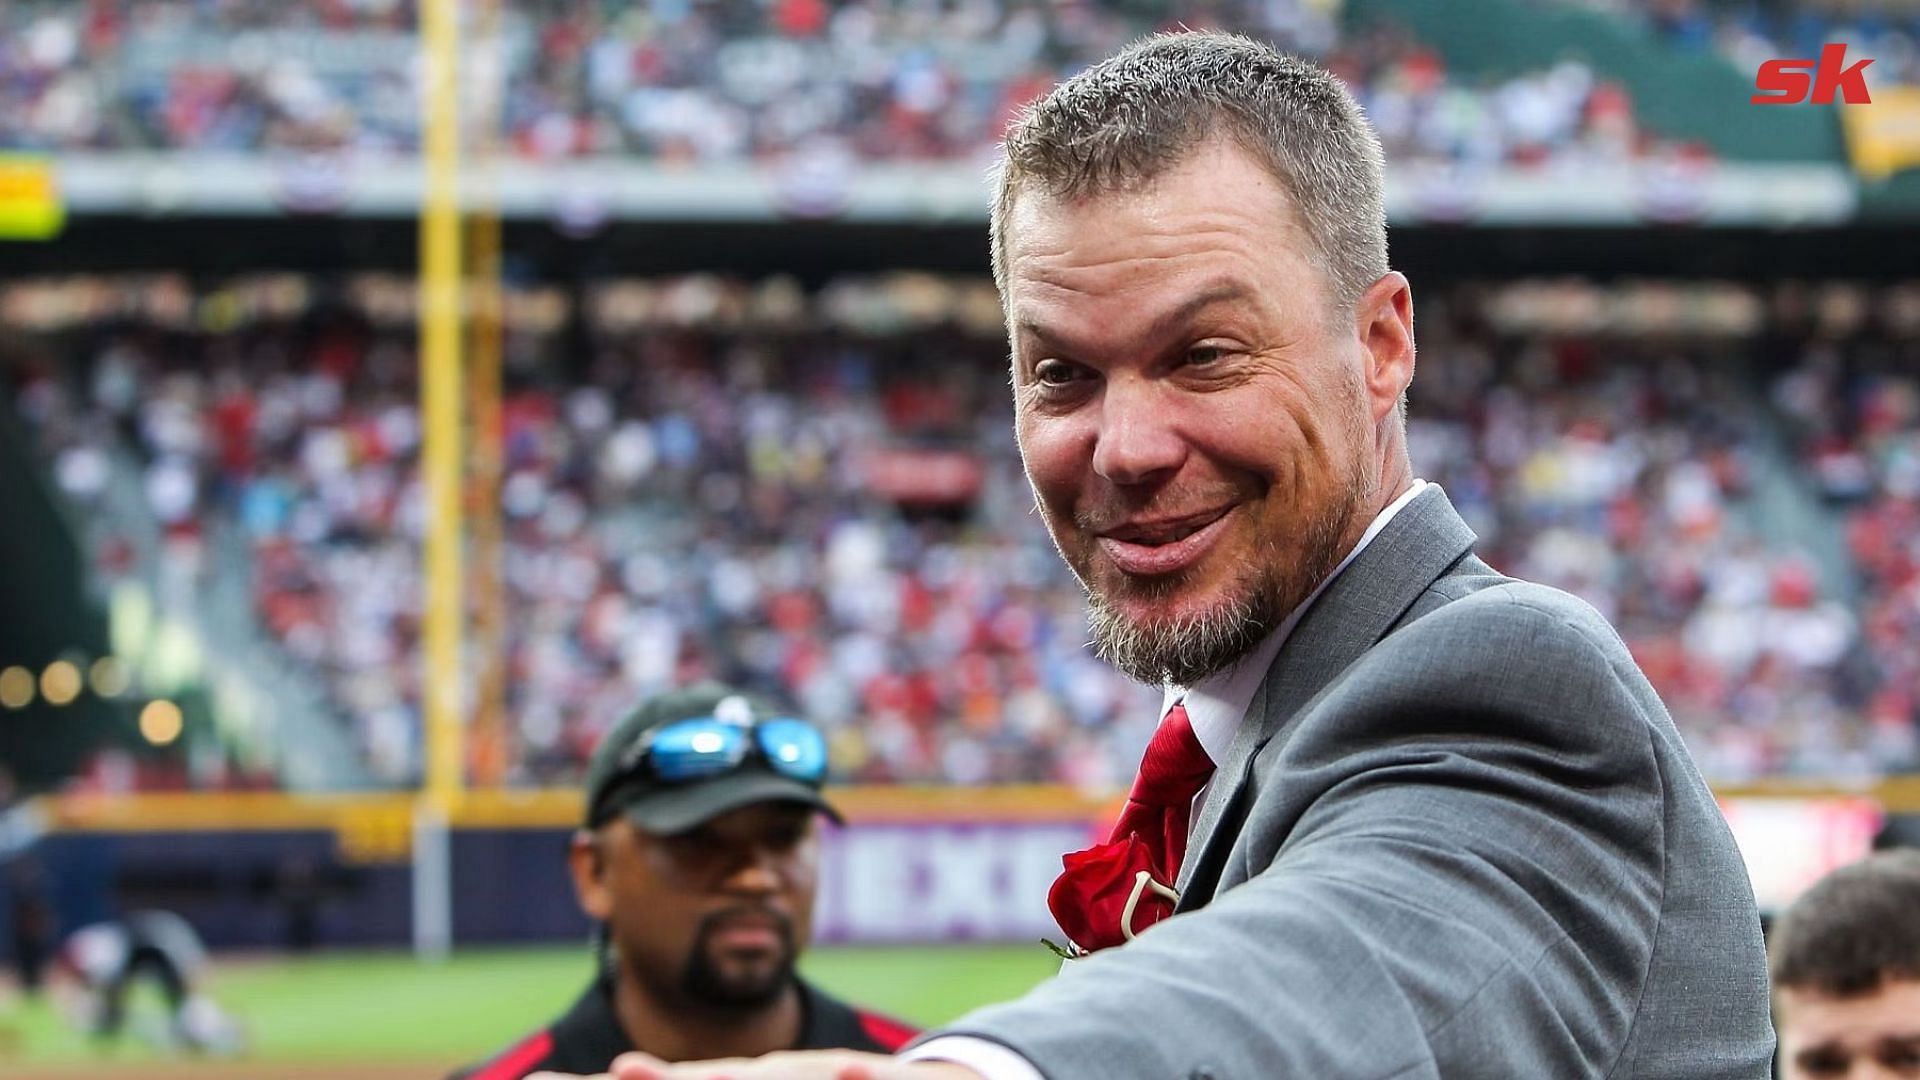 When Braves legend Chipper Jones was gripped with the fear of divorce drama after fathering a child out of wedlock